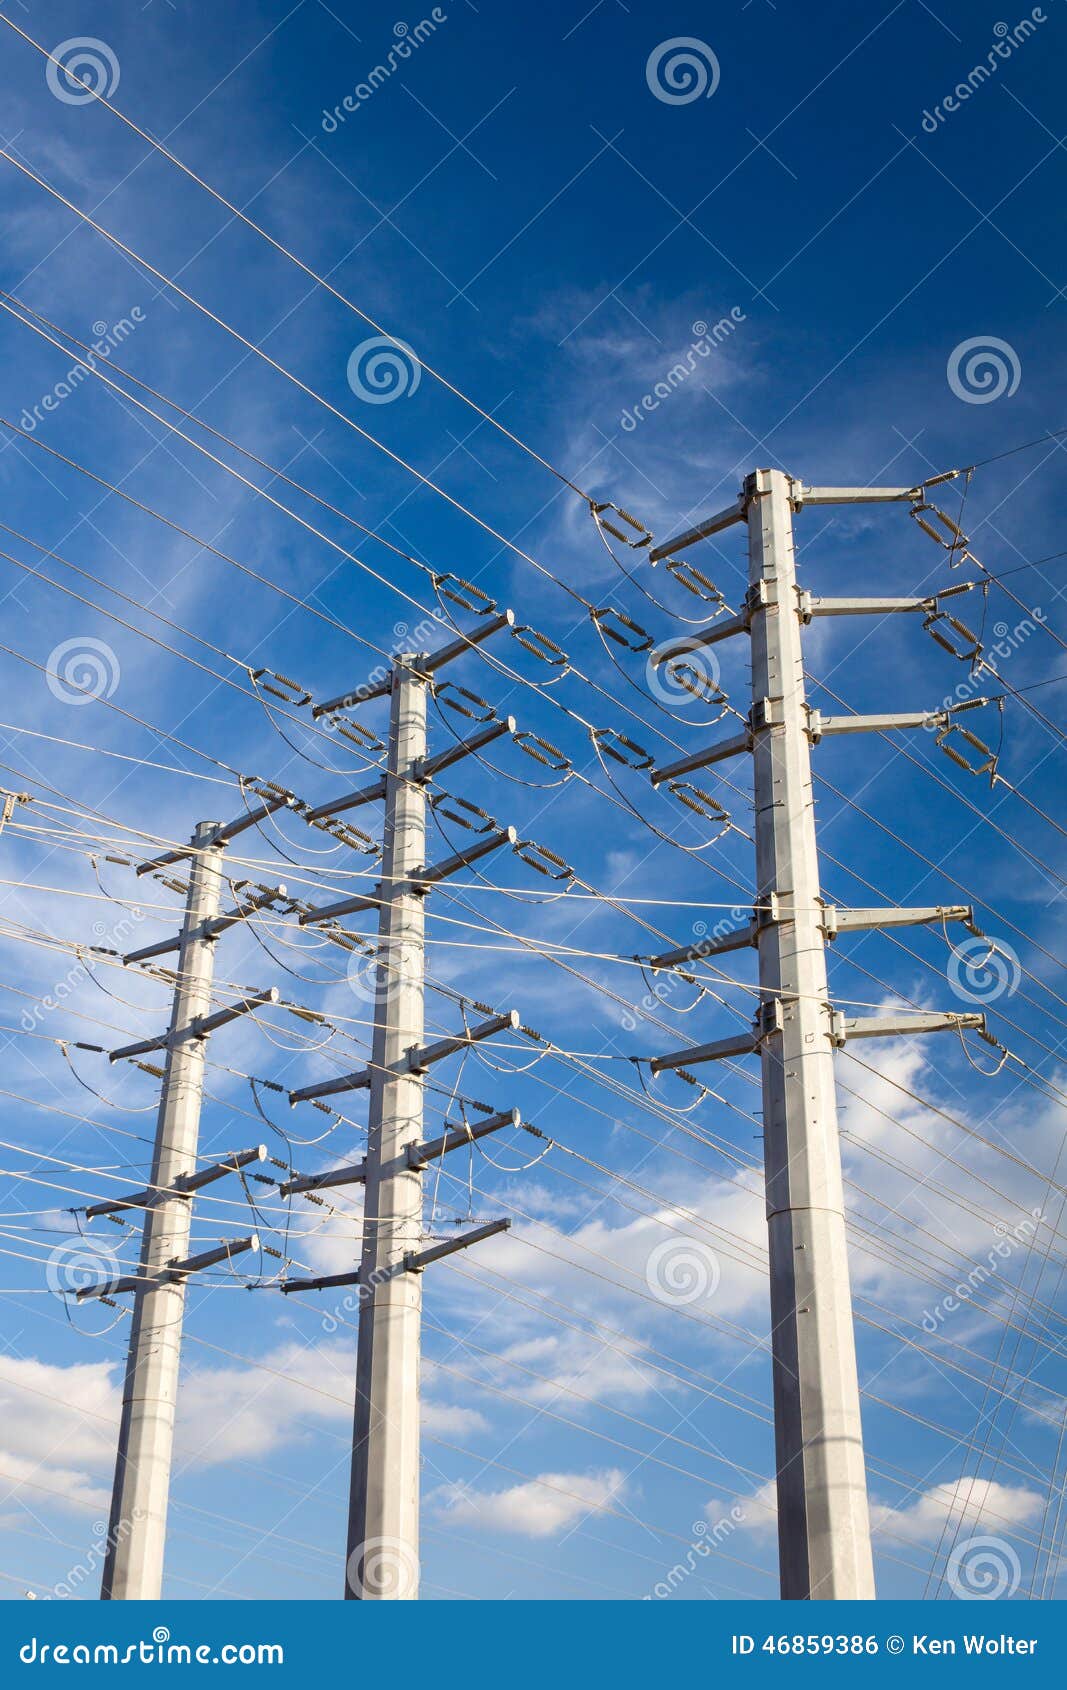 power transmission electrical lines